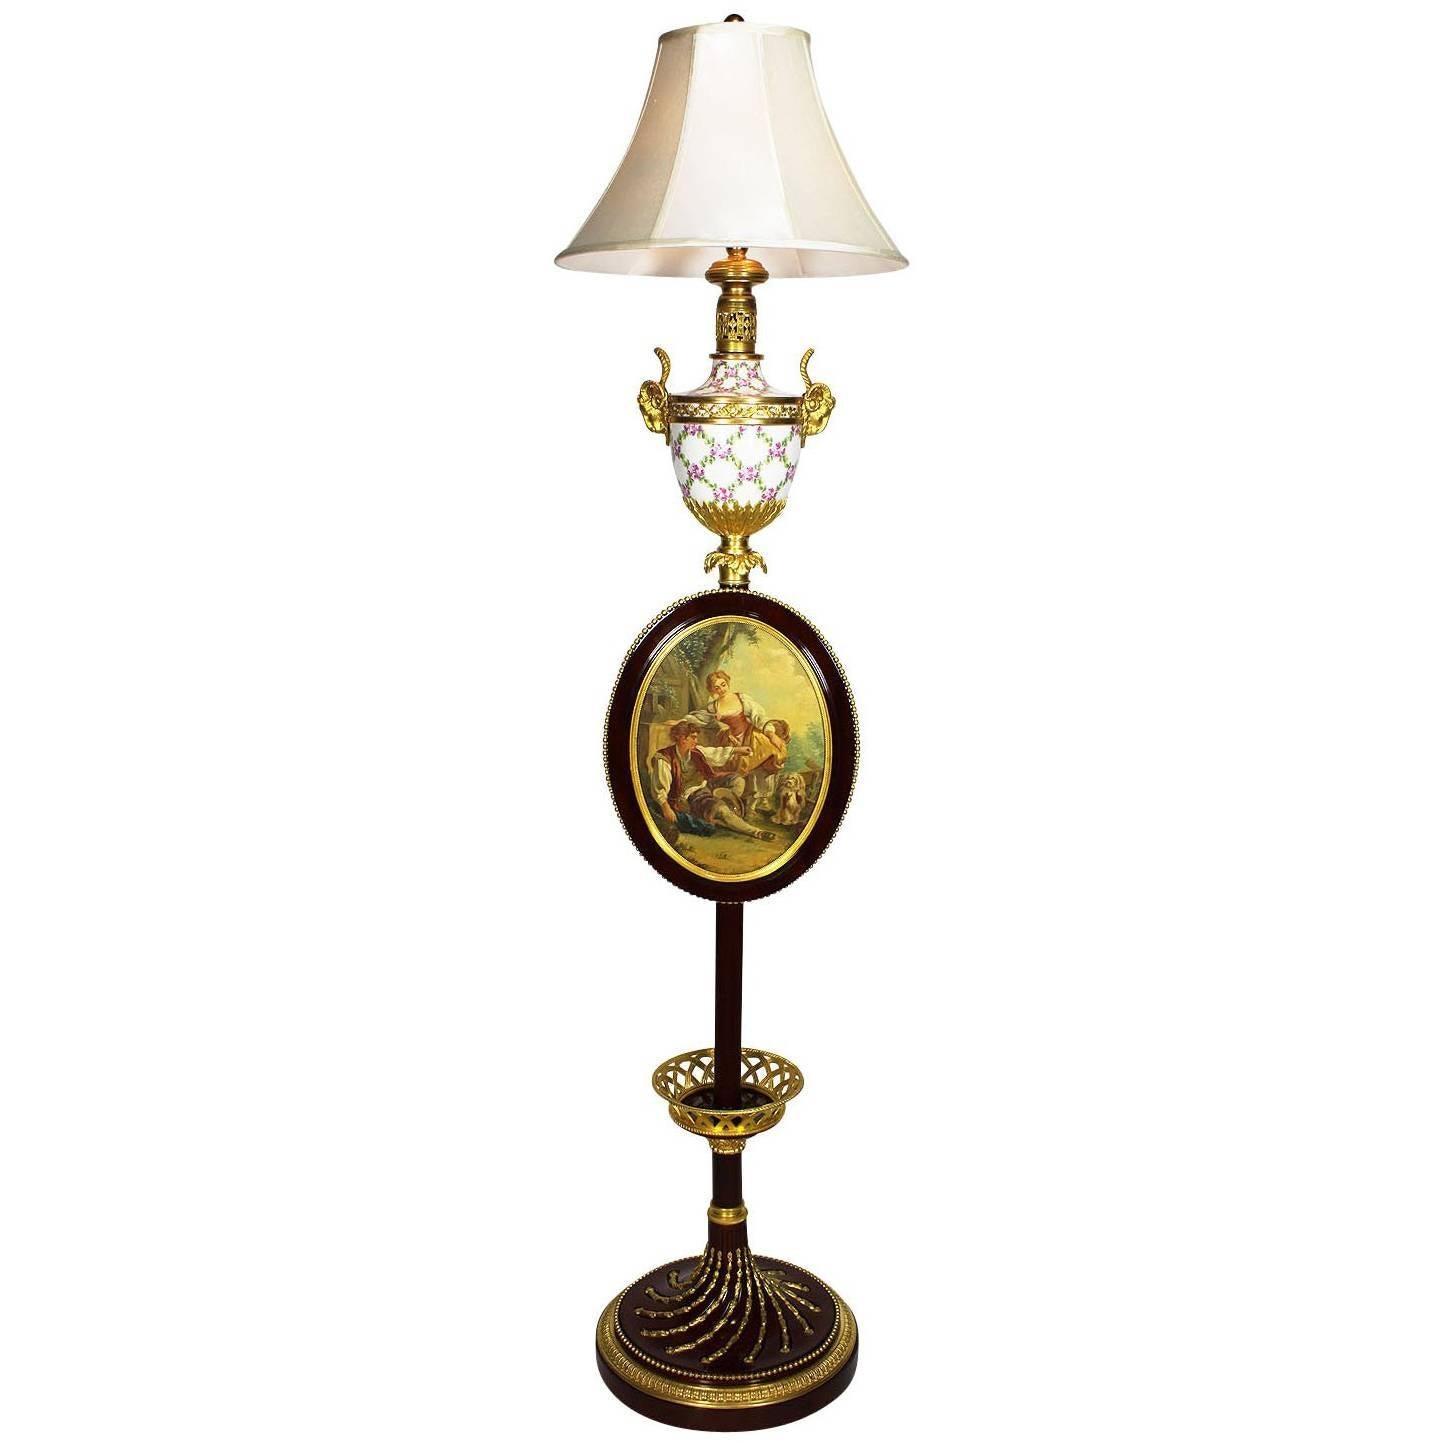 French 19th-20th Century Louis XV Porcelain Floor Lamp Attributed François Linke